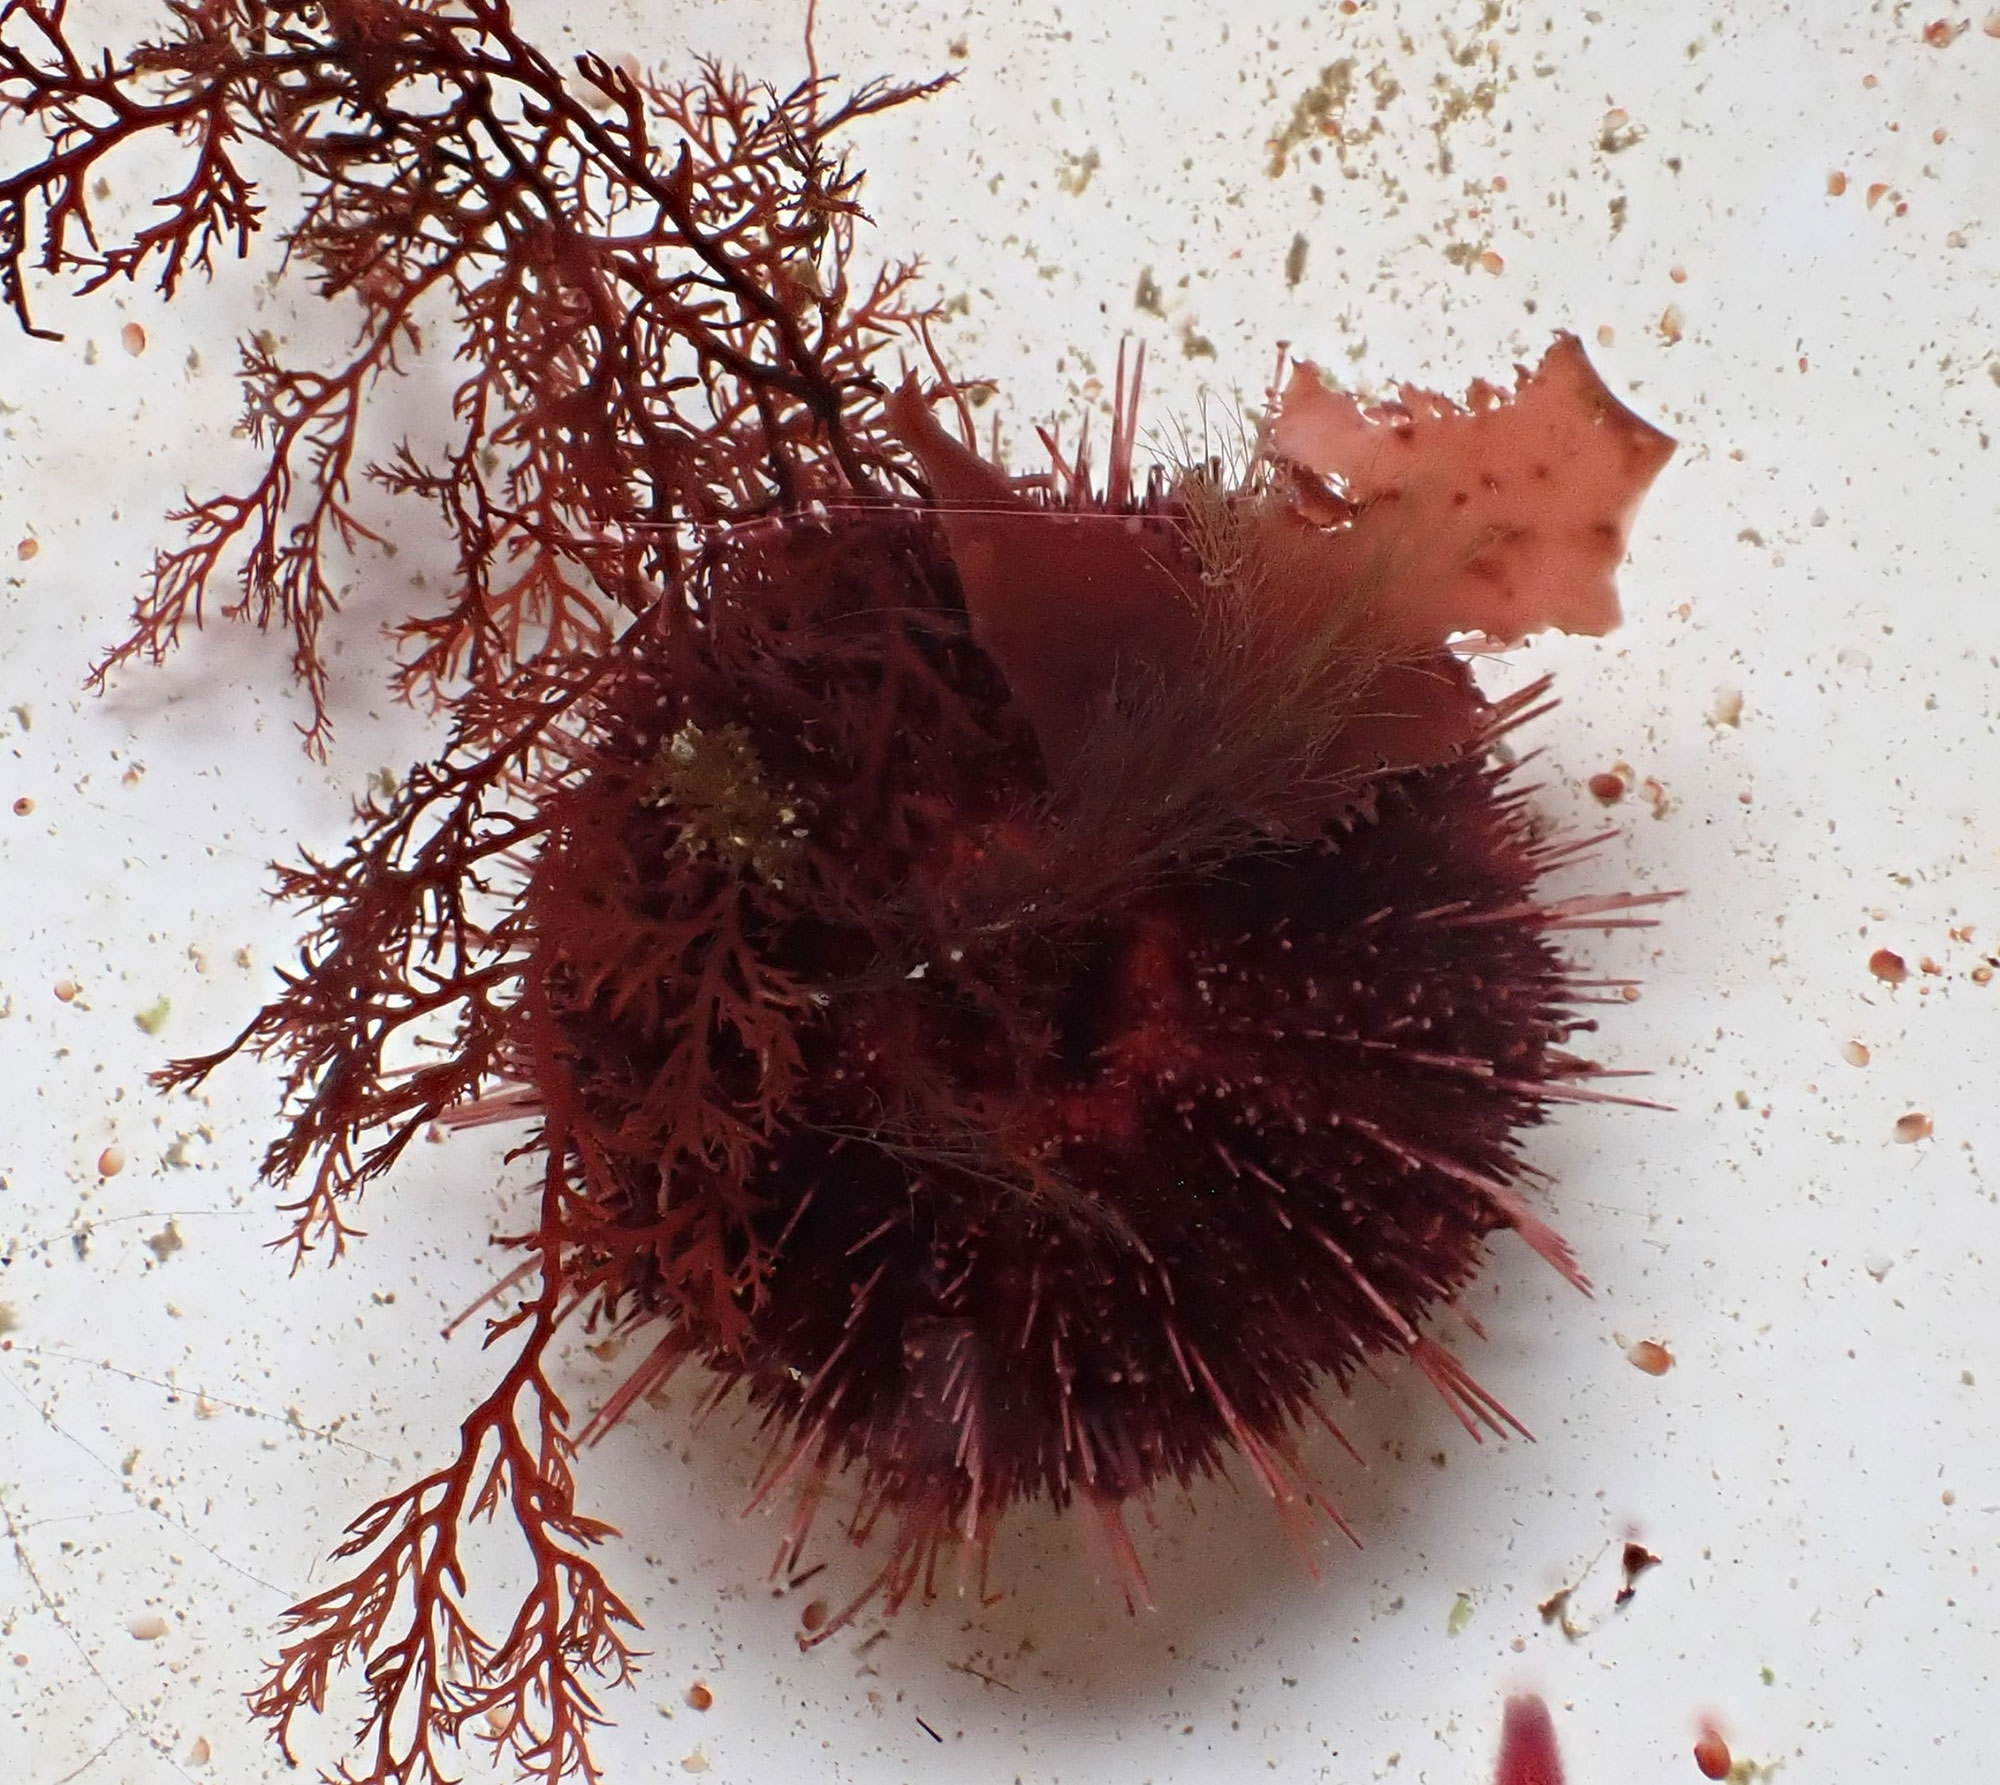 Close up of the purply short spined urchin with red bladed and branched algae on upper surface